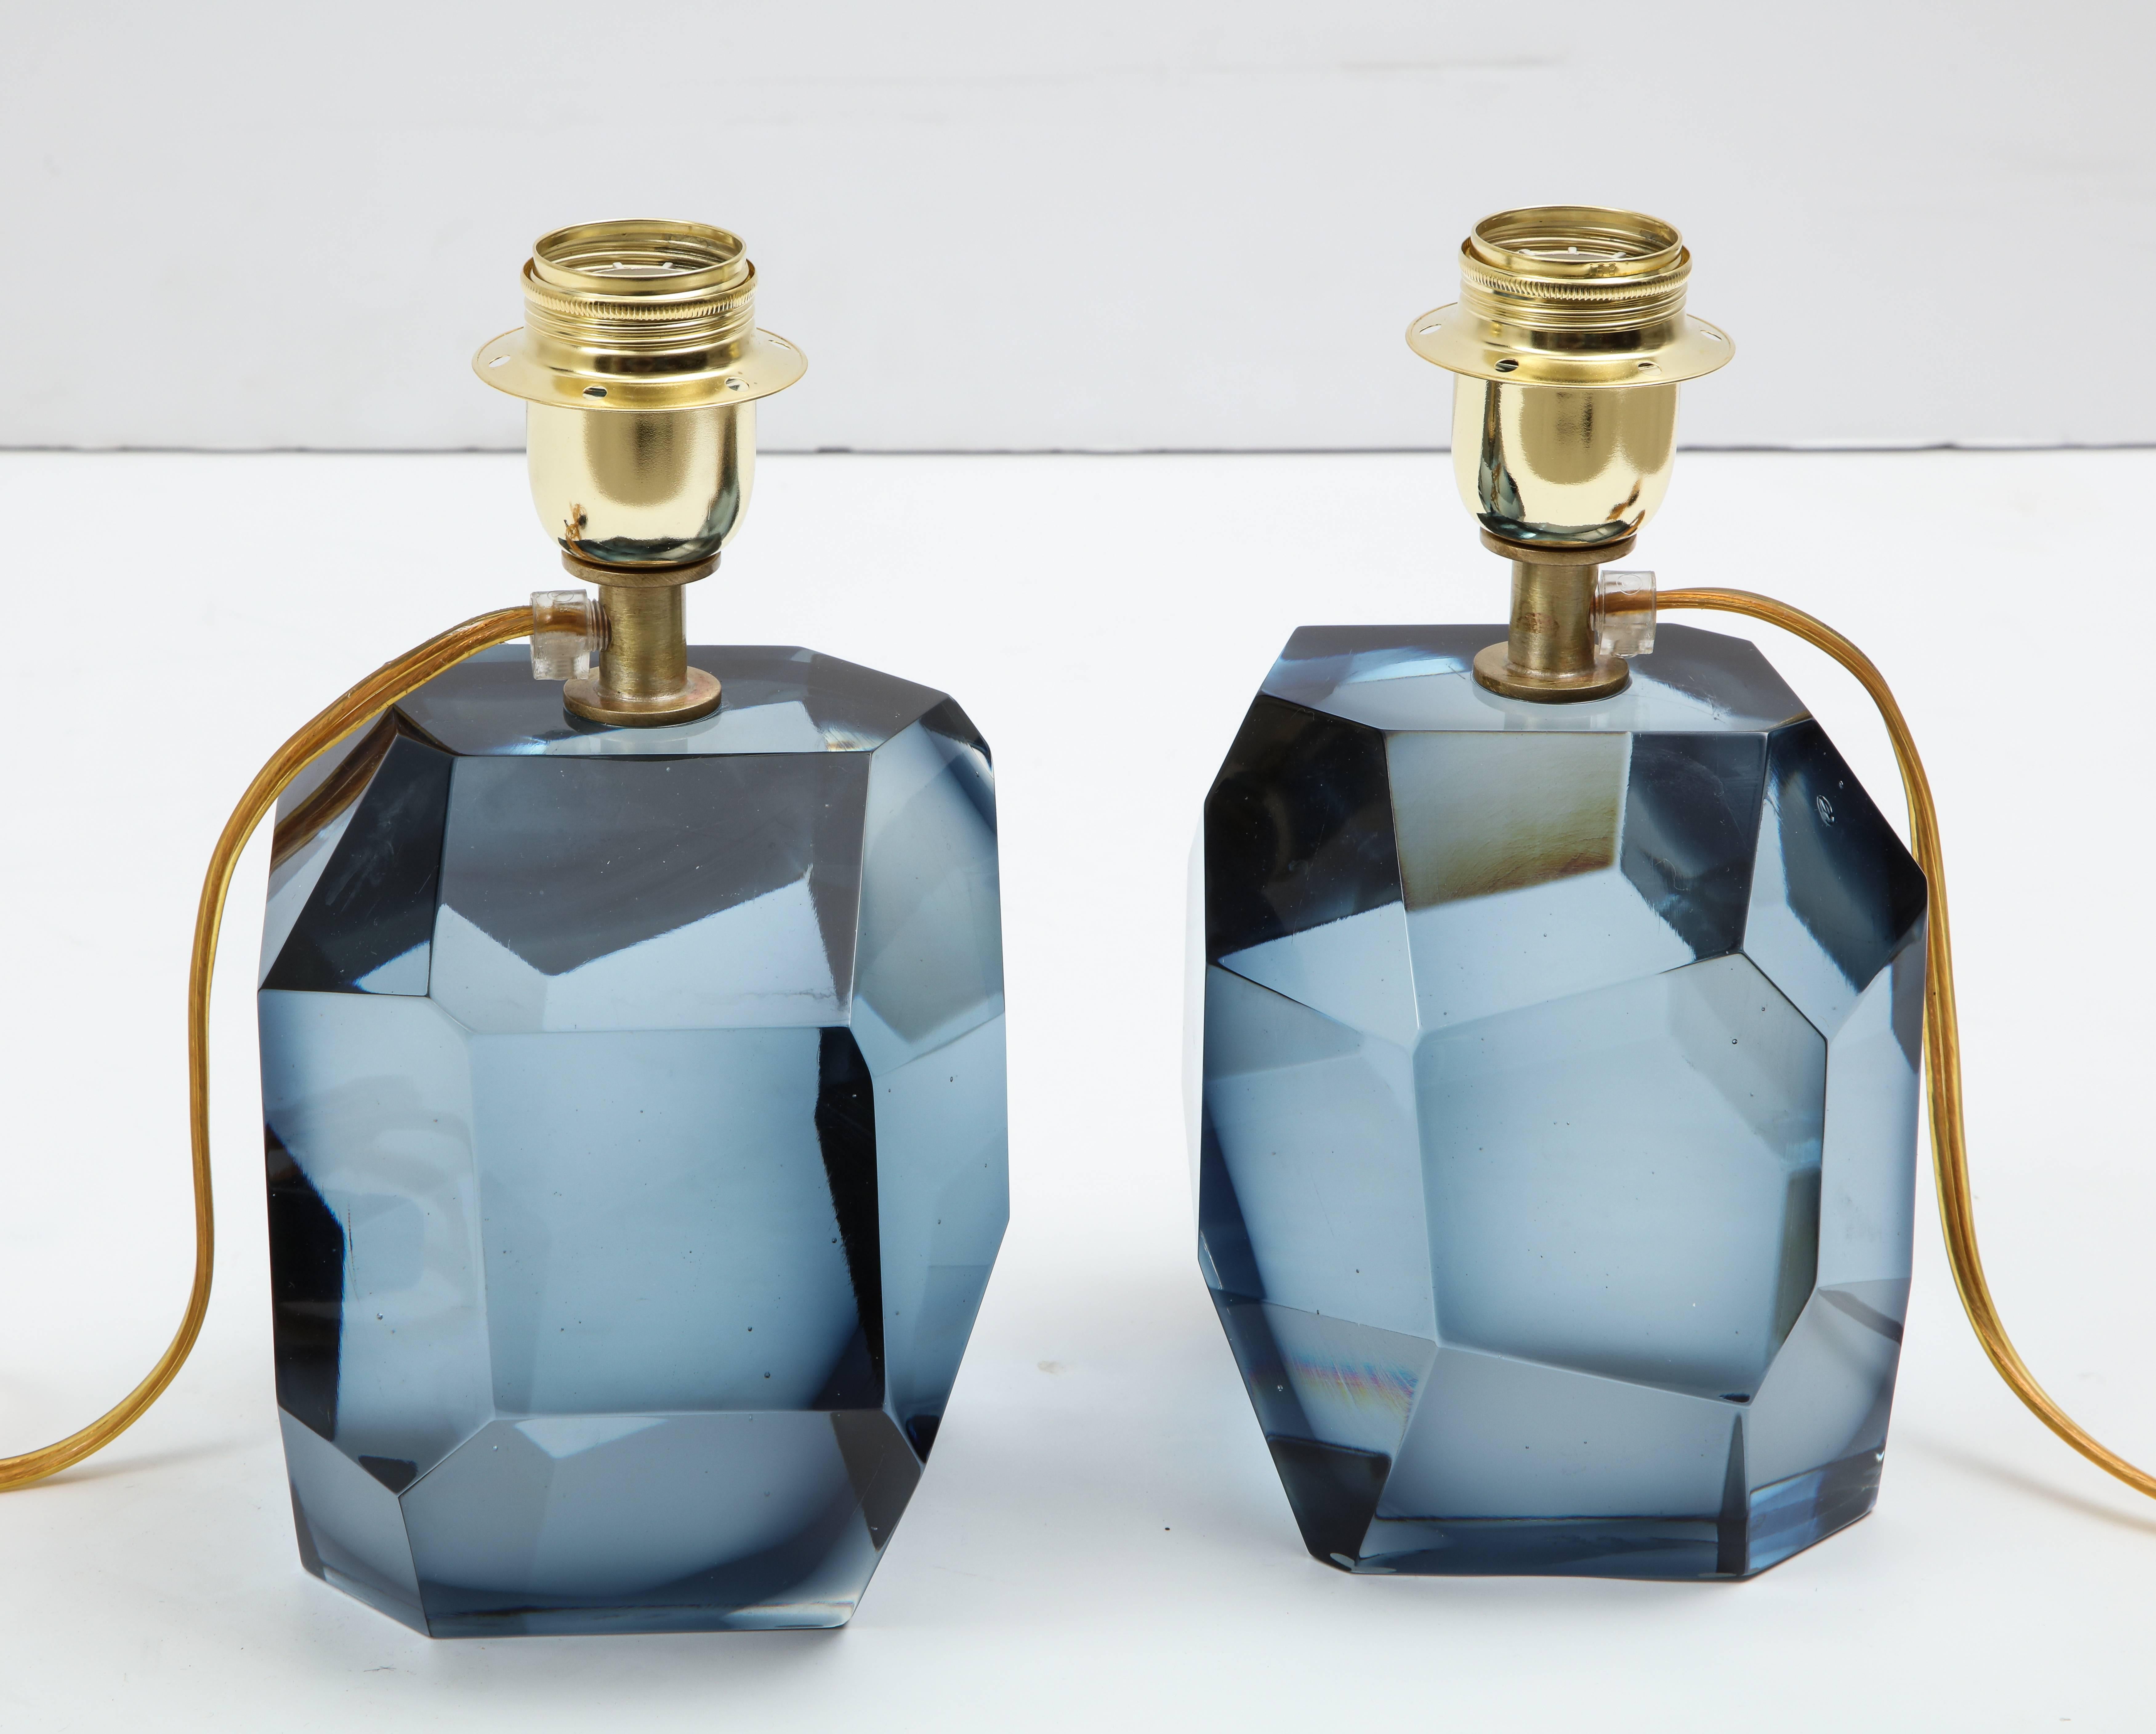 Unique pair of solid faceted Murano glass table lamps in an elegant blue grey color in the style of Roberto Rida with a gold tone/brass armature heavy and solid. Signed by the Murano Glass Master Alberto Dona/Murano. Made by hand in Murano, Italy.